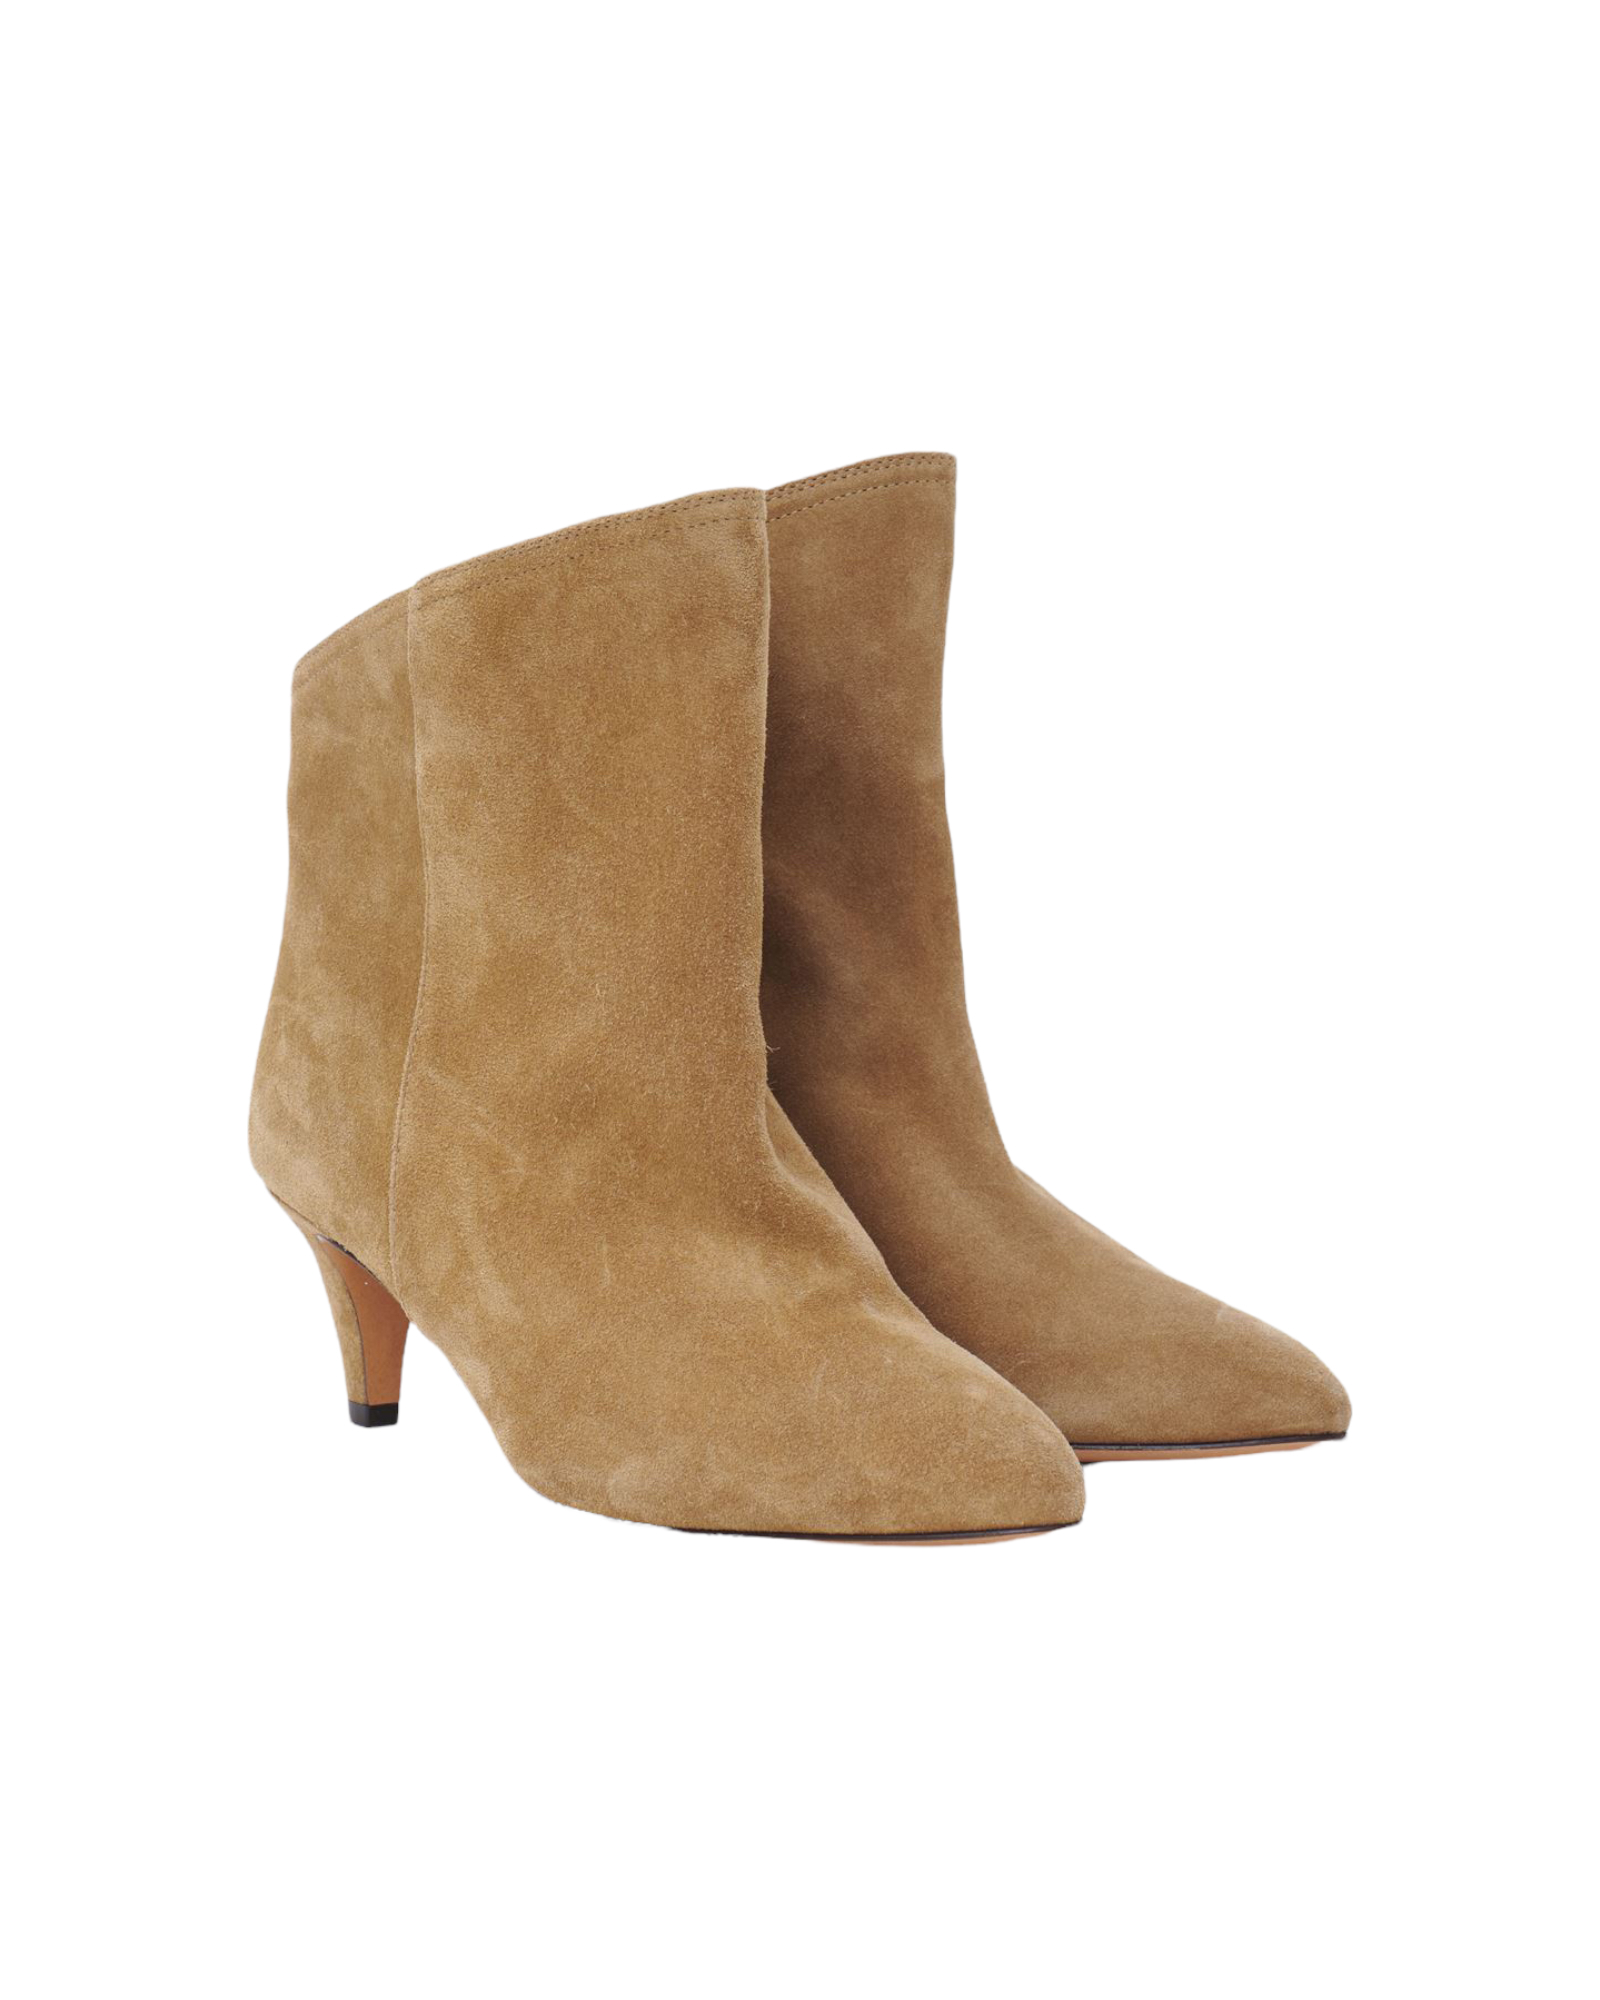 Ankle Boots, Dripi, Isabel Marant, Suede, Taupe